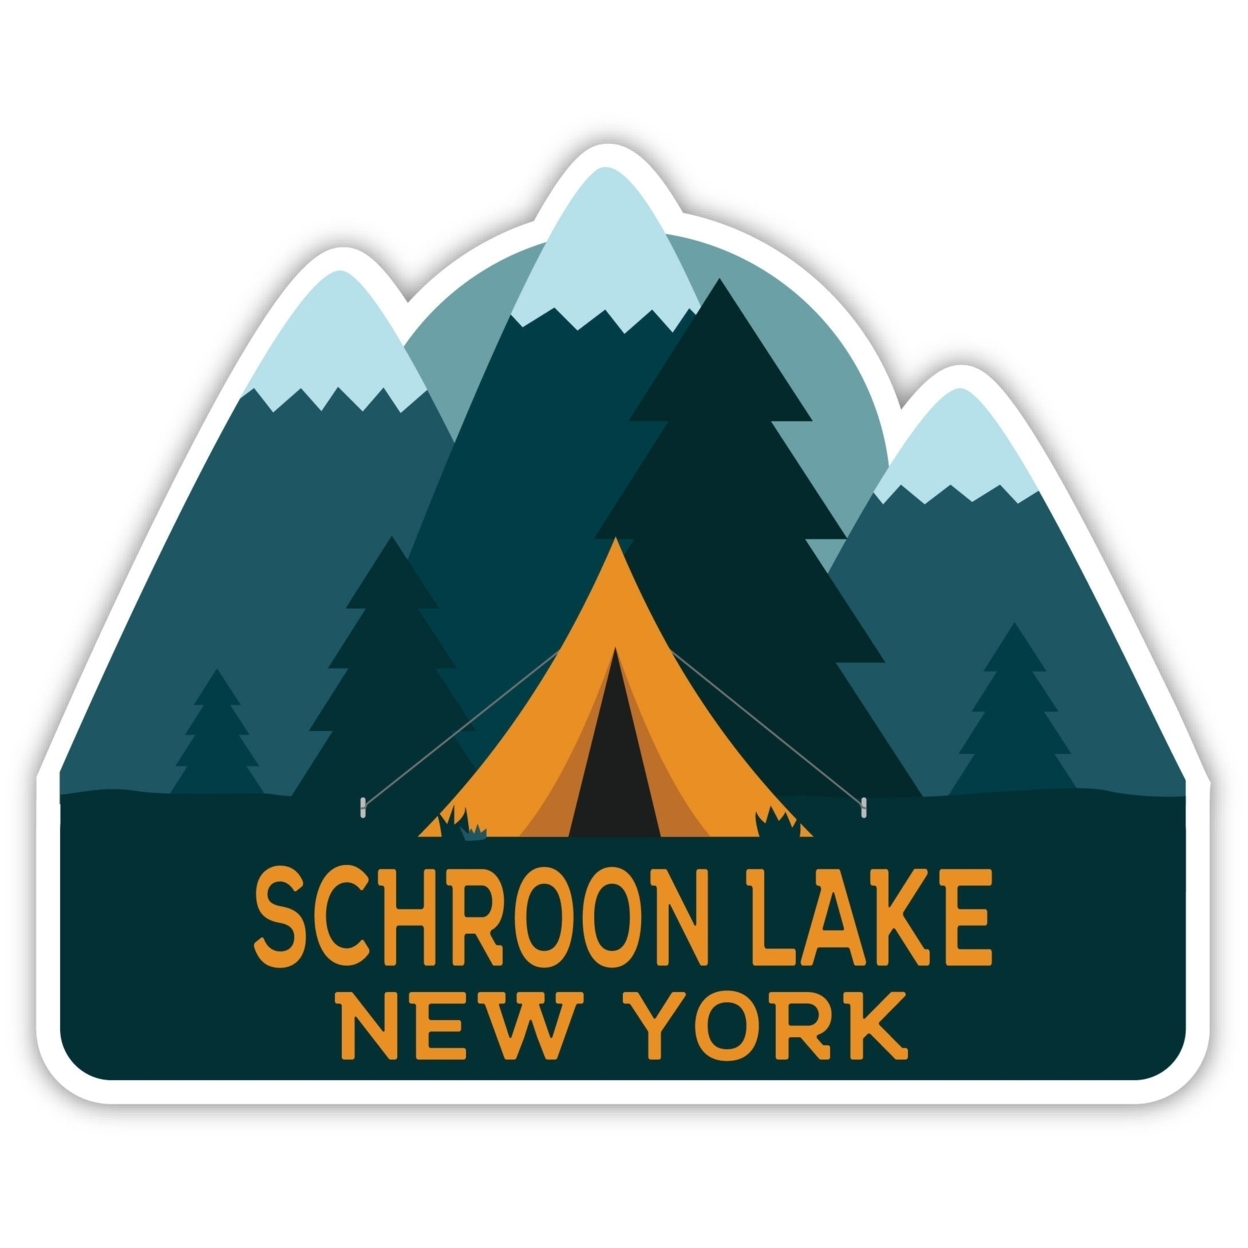 Schroon Lake New York Souvenir Decorative Stickers (Choose Theme And Size) - Single Unit, 2-Inch, Great Outdoors